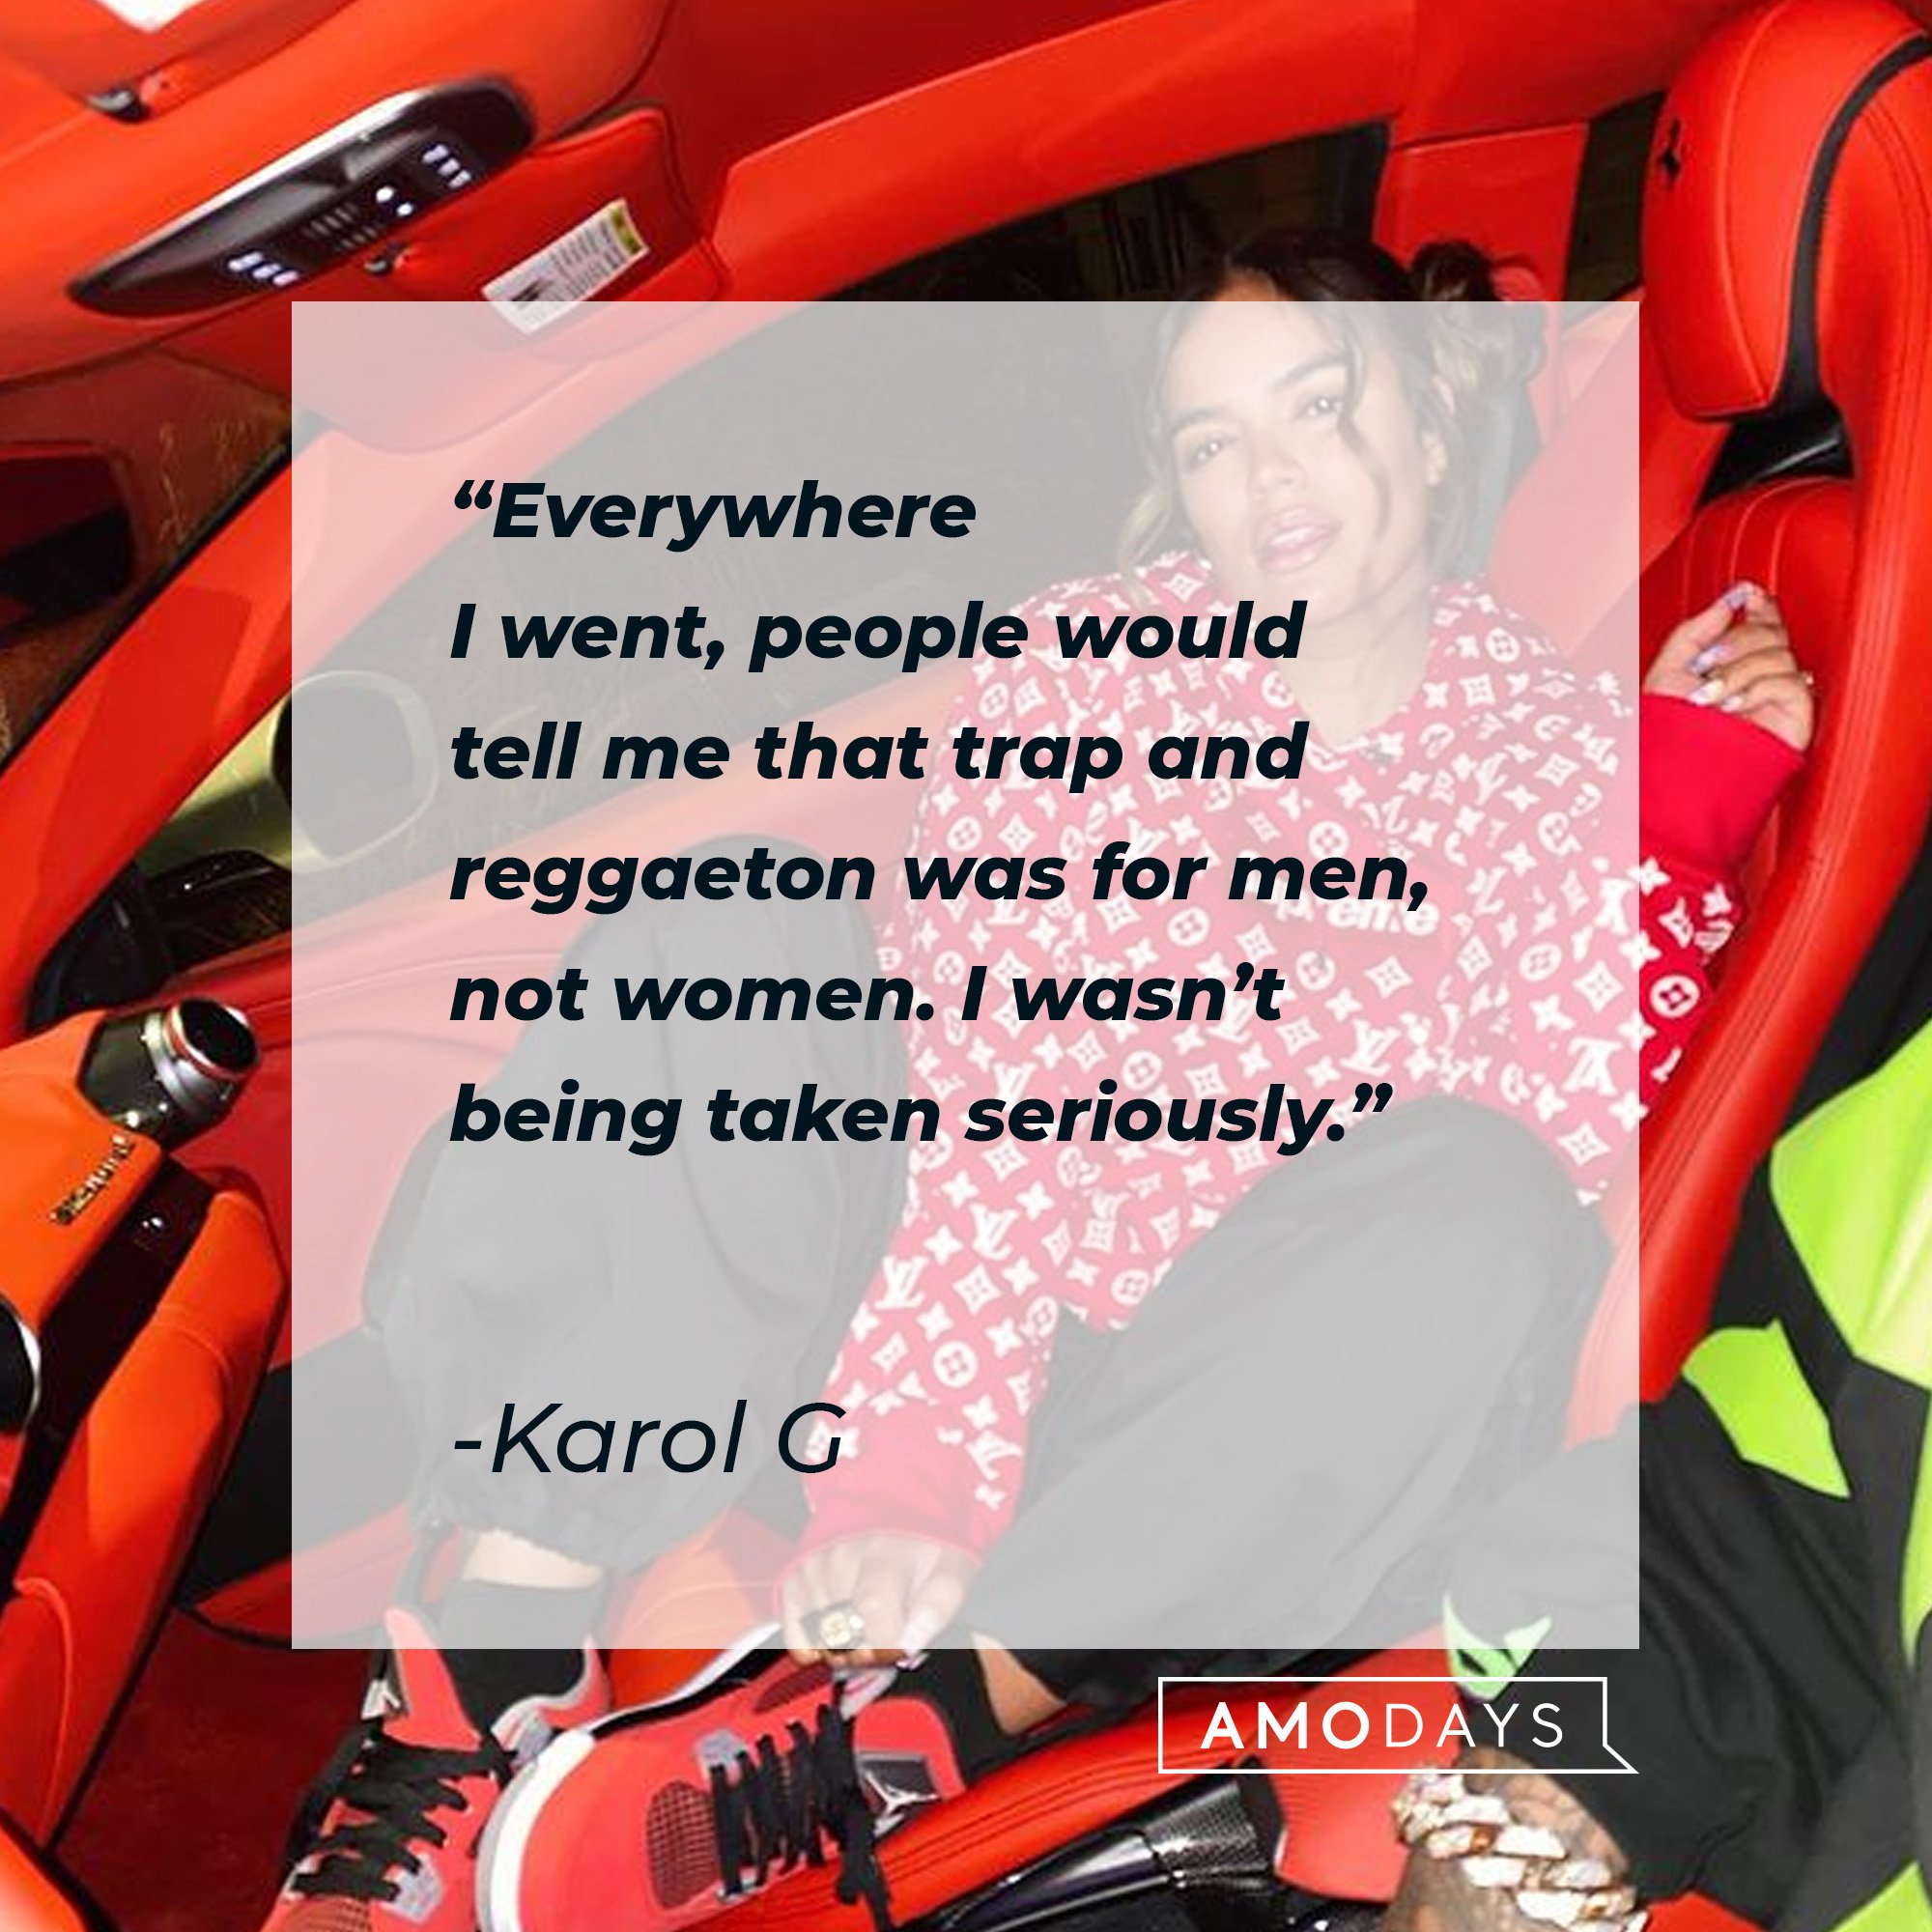  Karol G’s quote: "Everywhere I went, people would tell me that trap and reggaeton was for men, not women. I wasn’t being taken seriously." | Image: AmoDays